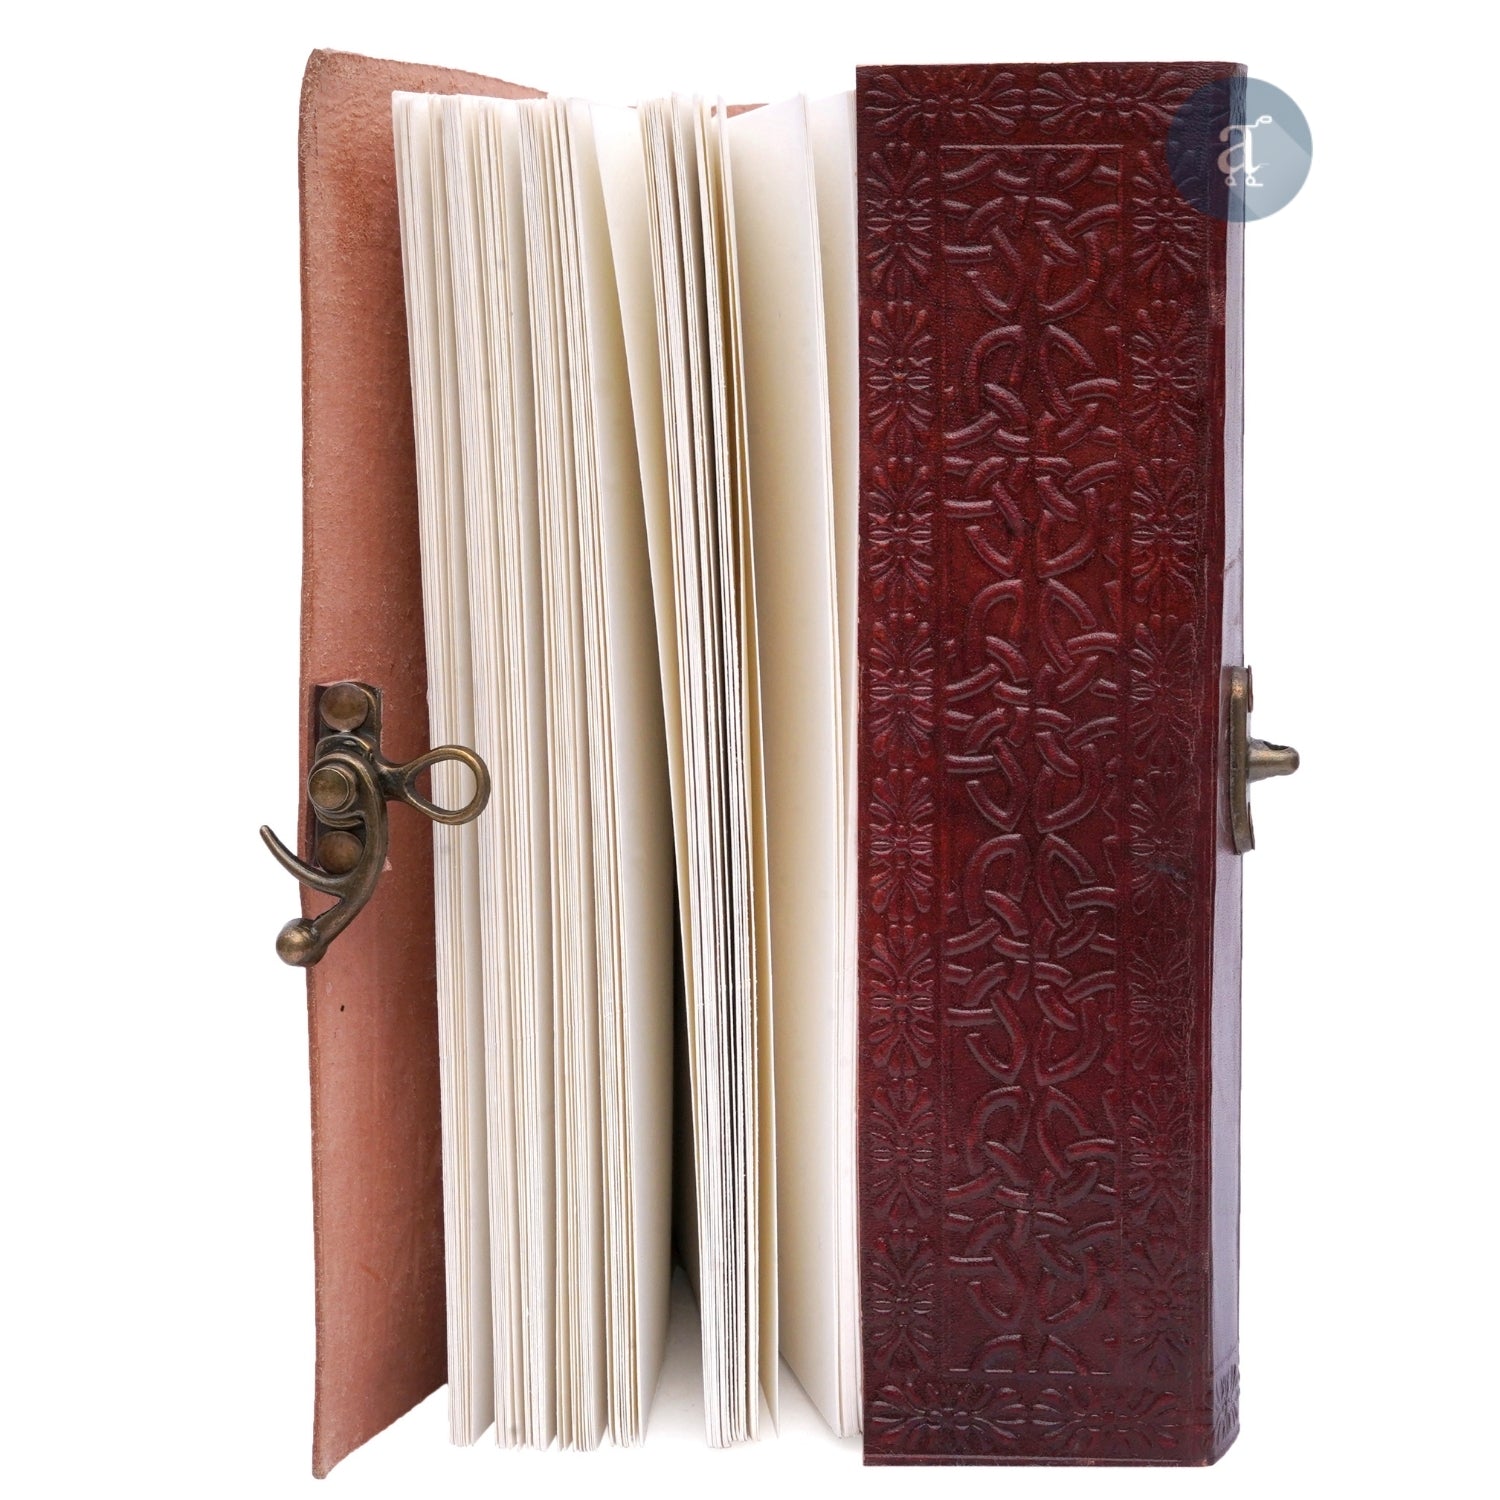 Tree Of Life Leather Journal with Lock Pages